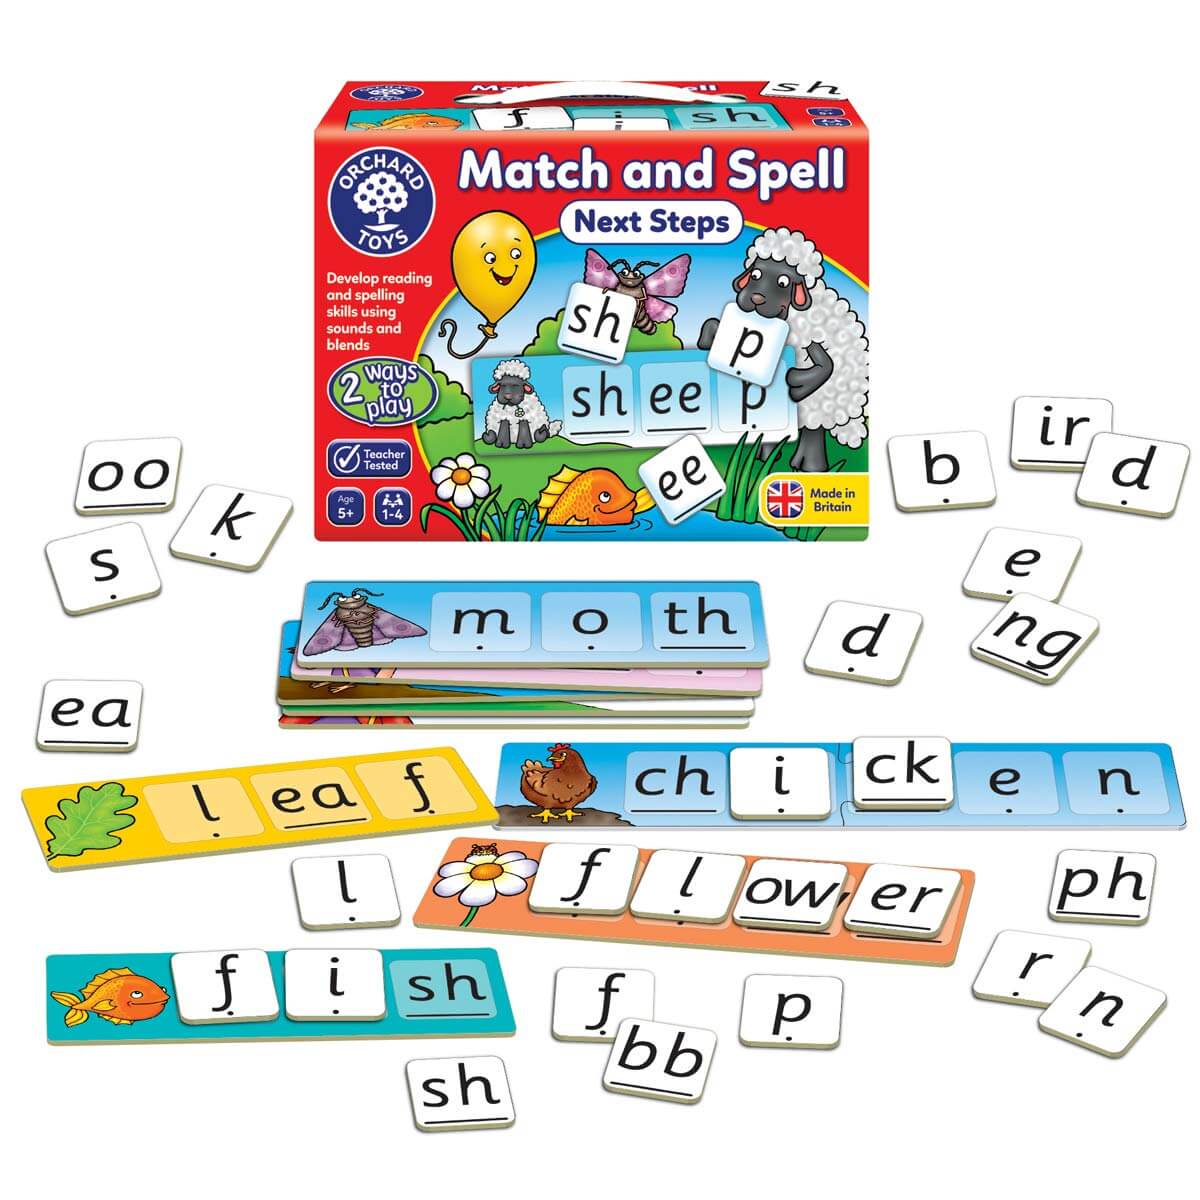 Match and Spell Next Steps Orchard Toys